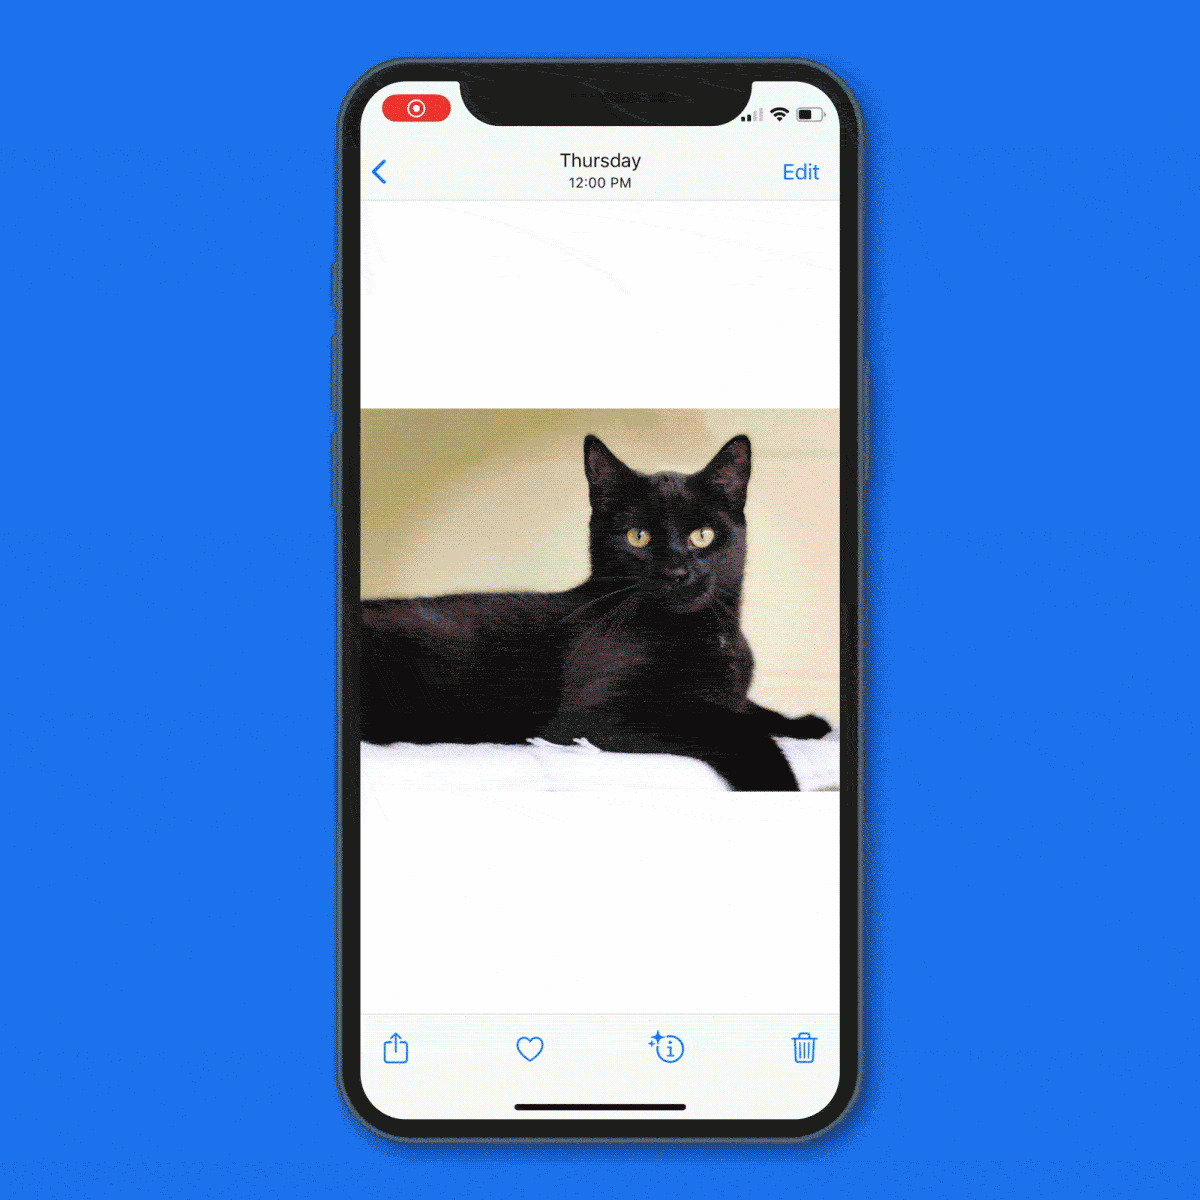 Using a photo in your Photos app